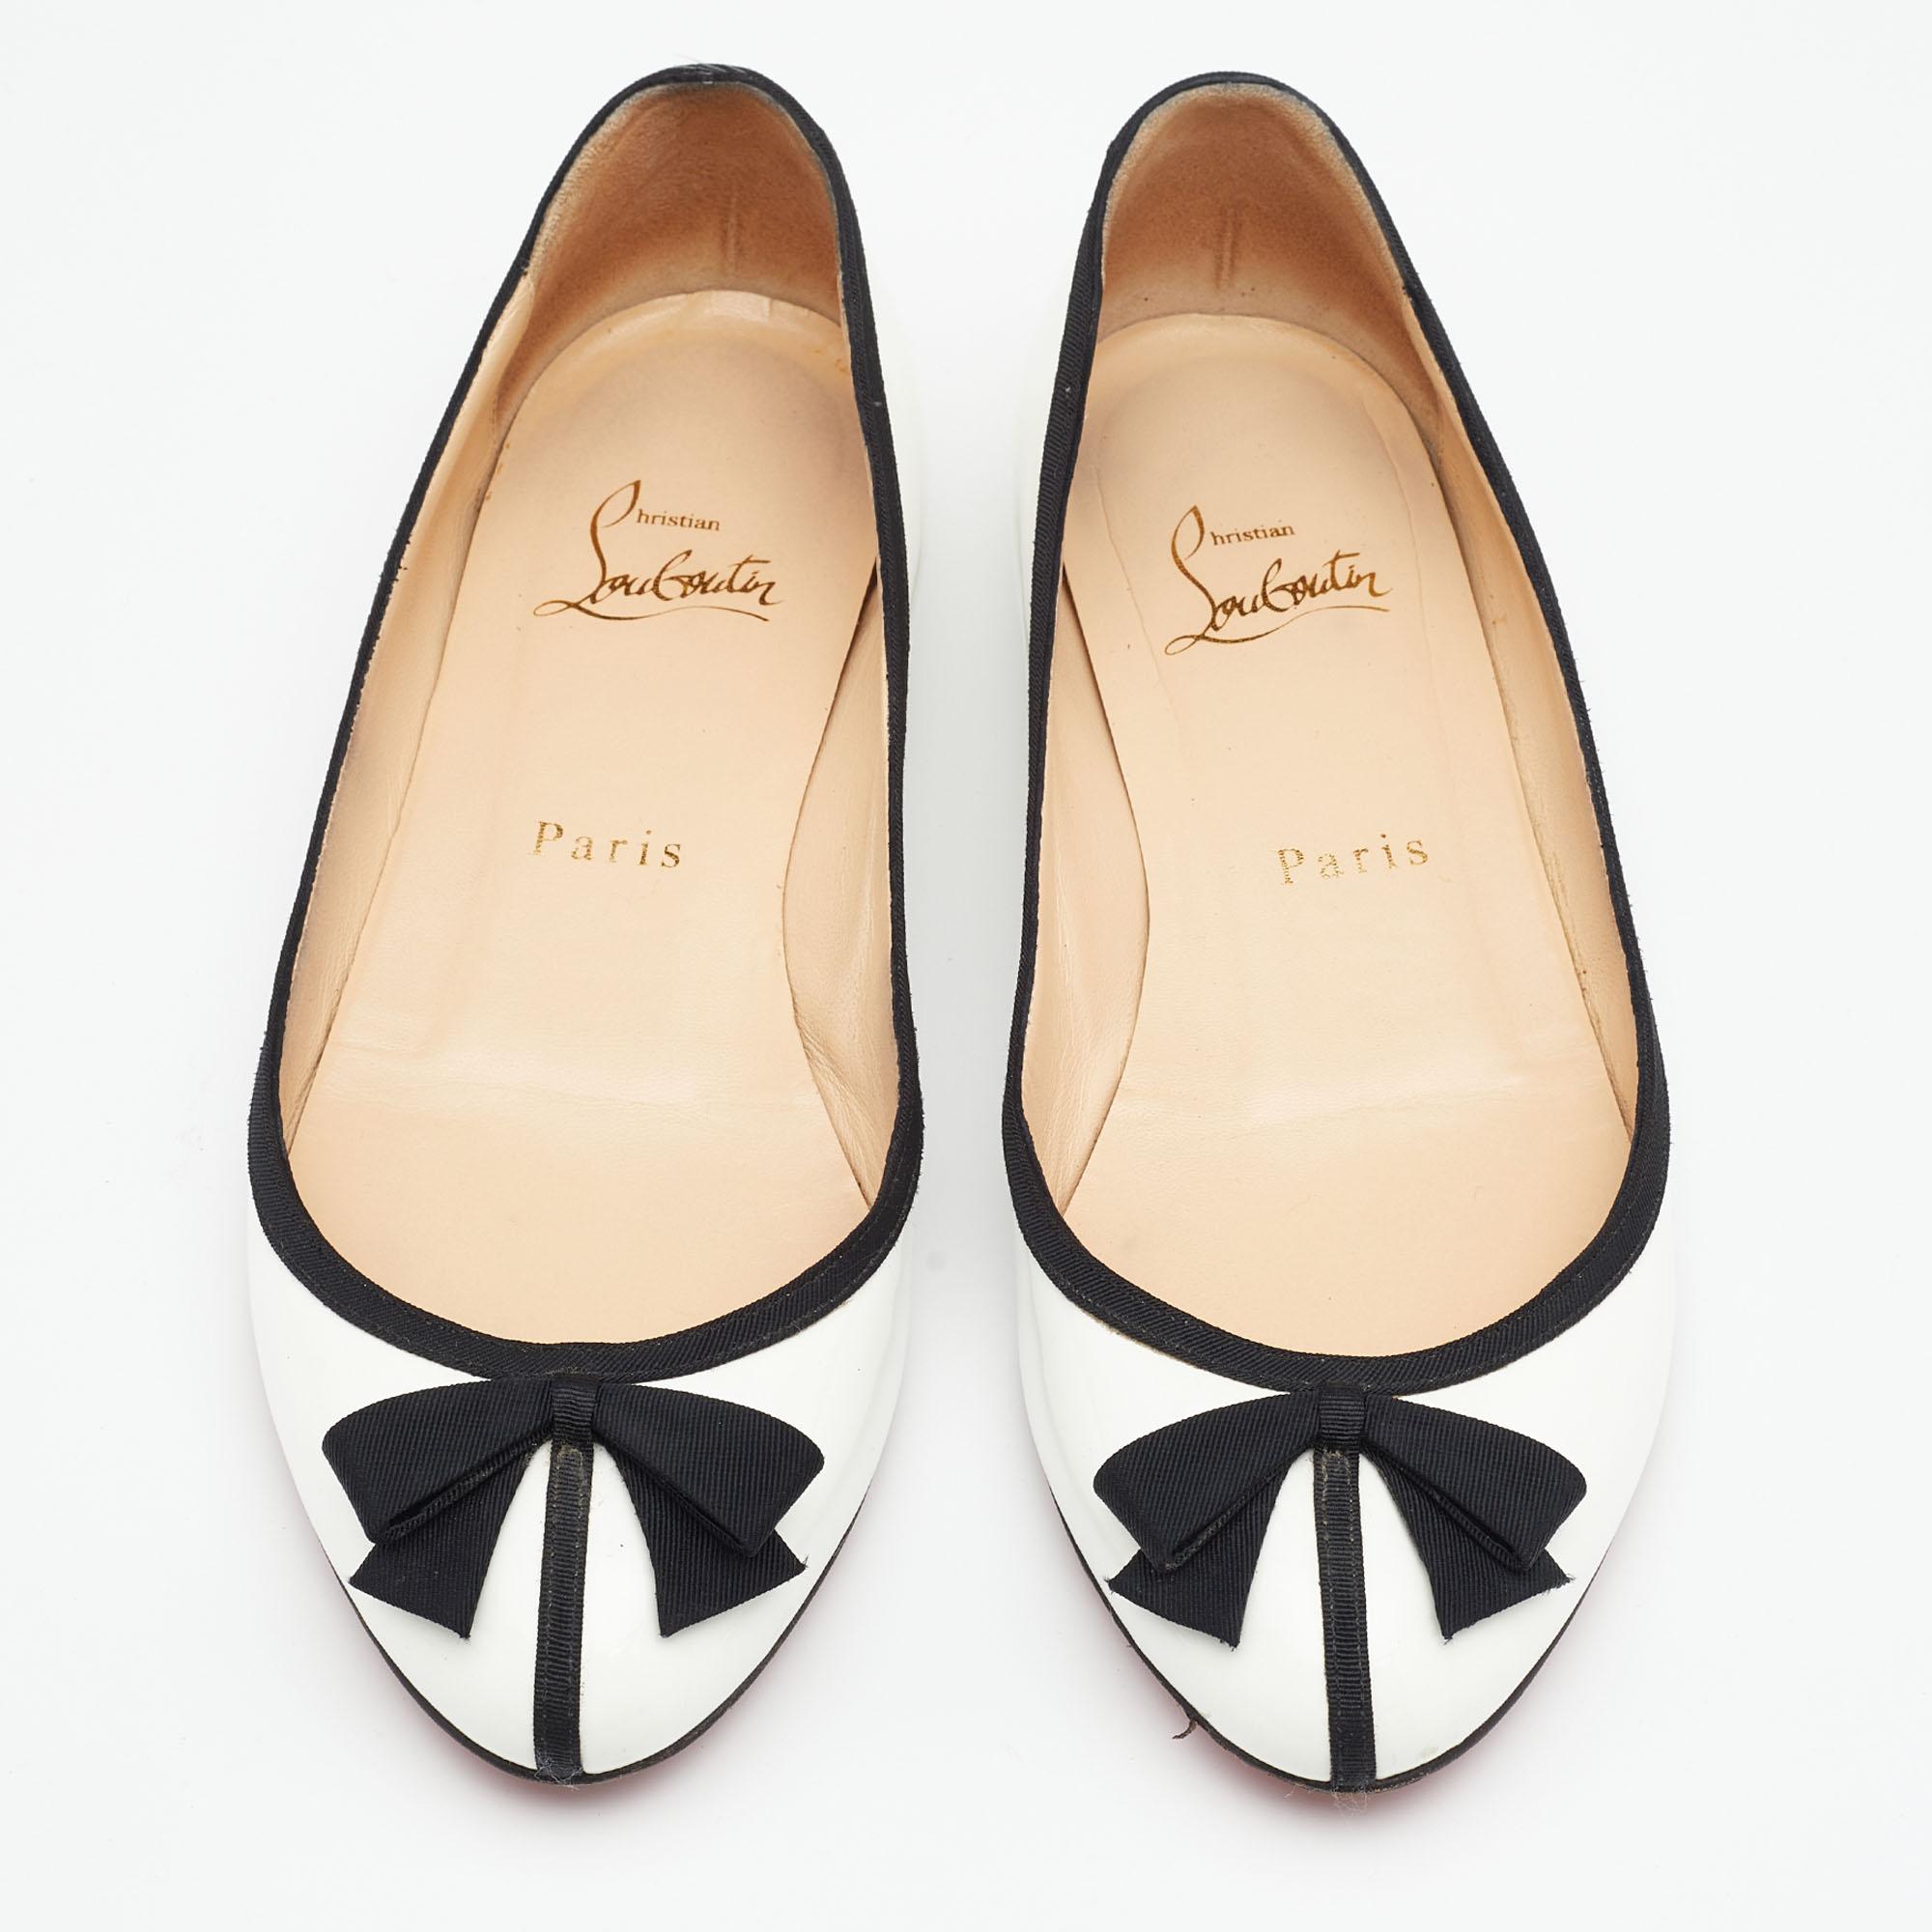 These Balinodono ballet flats from Christian Louboutin are all your feet need to be comfy and stylish! They are crafted using black-white patent leather on the exterior. They display a bow accent on the toes, red soles, and a slip-on feature. These